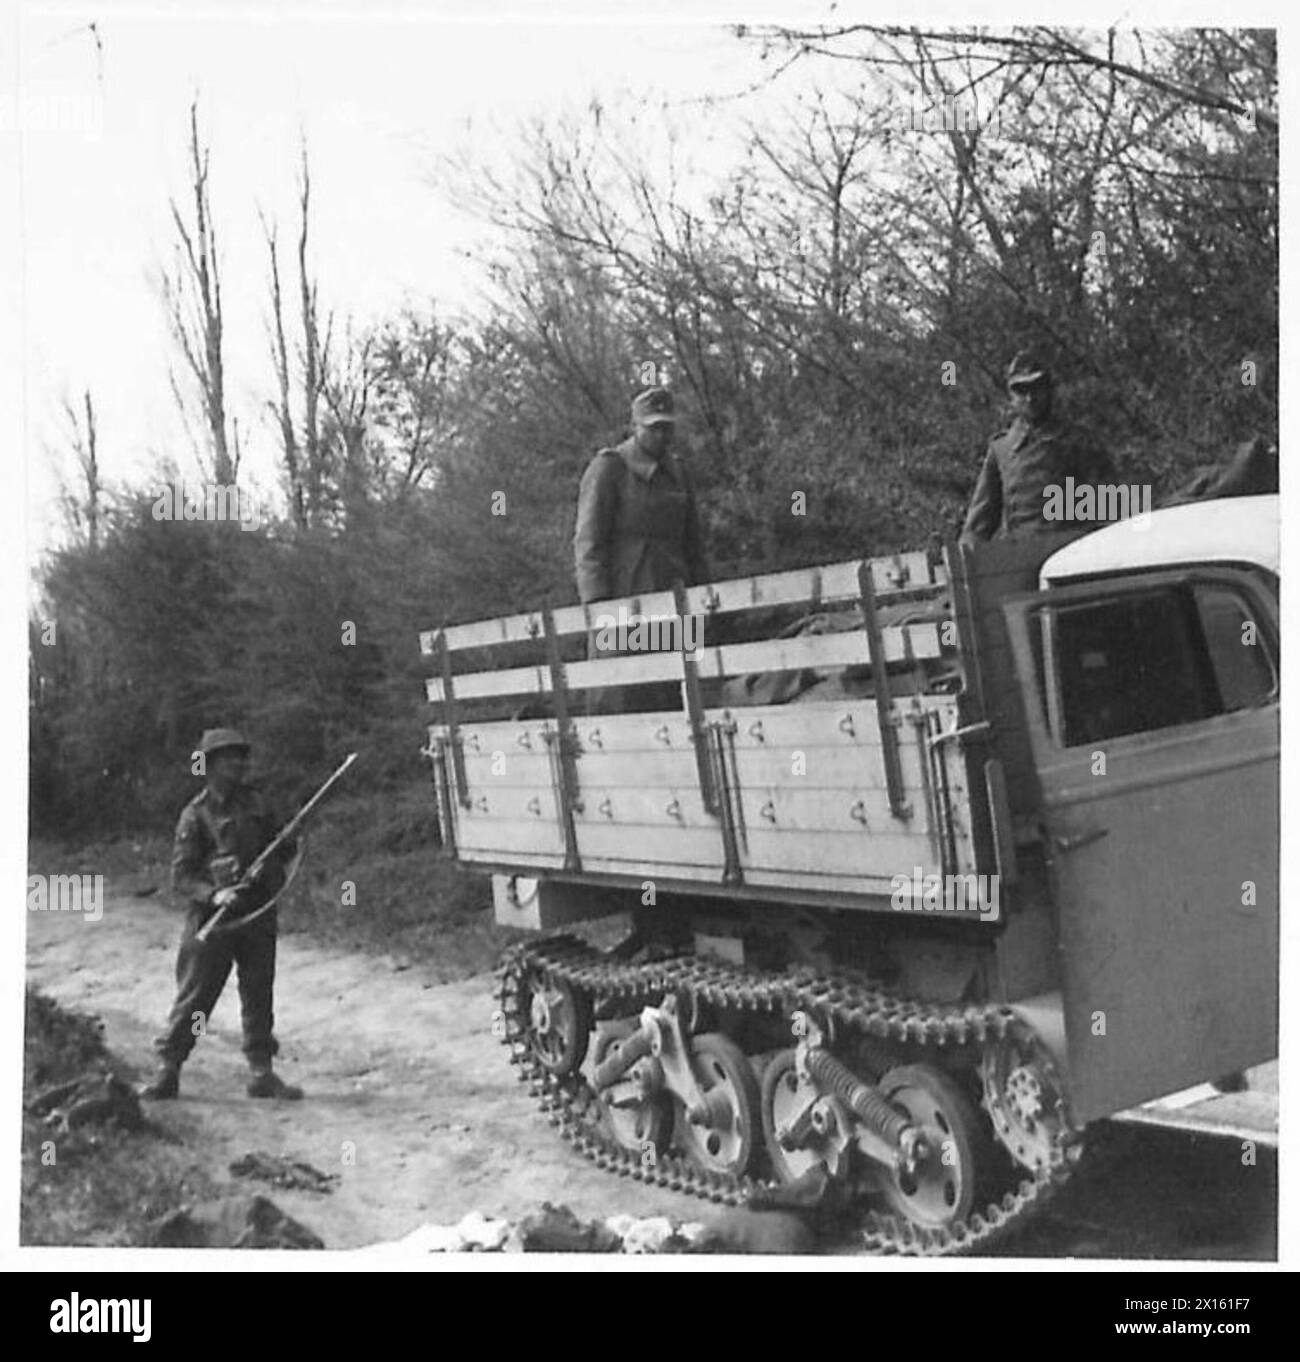 FIRST ARMY : JOINT ALLIED ATTACK ON PICHON - They saved their skins. Two Germans found hiding in a truck British Army Stock Photo